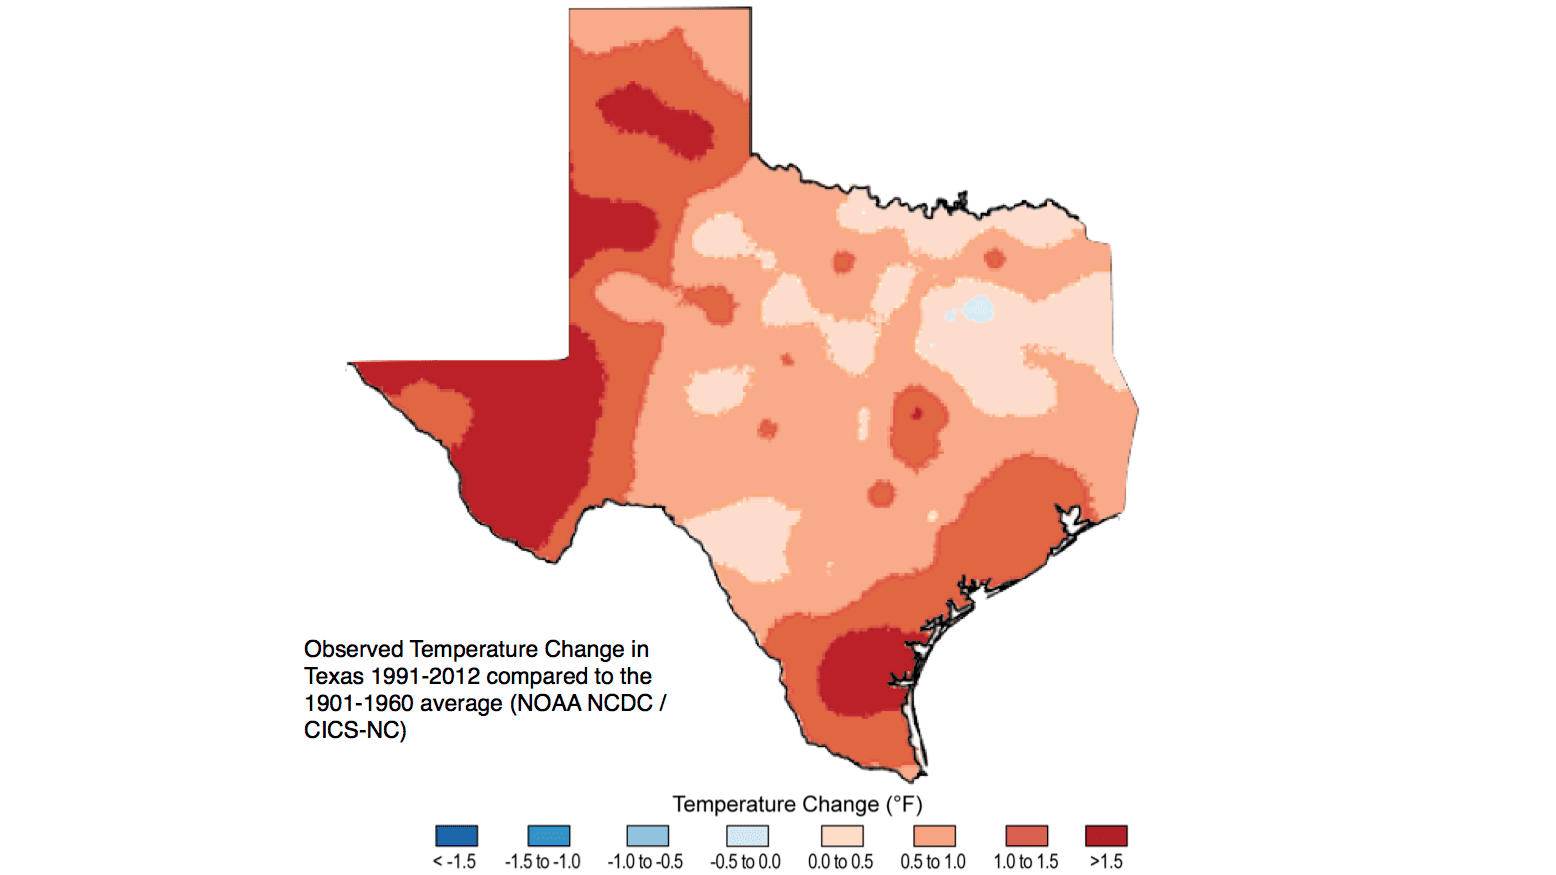 A part of a map from a federal government report on climate change. Temperatures throughout the state of Texas are rising against historical averages, with the Rio Grande Valley getting particularly warm.